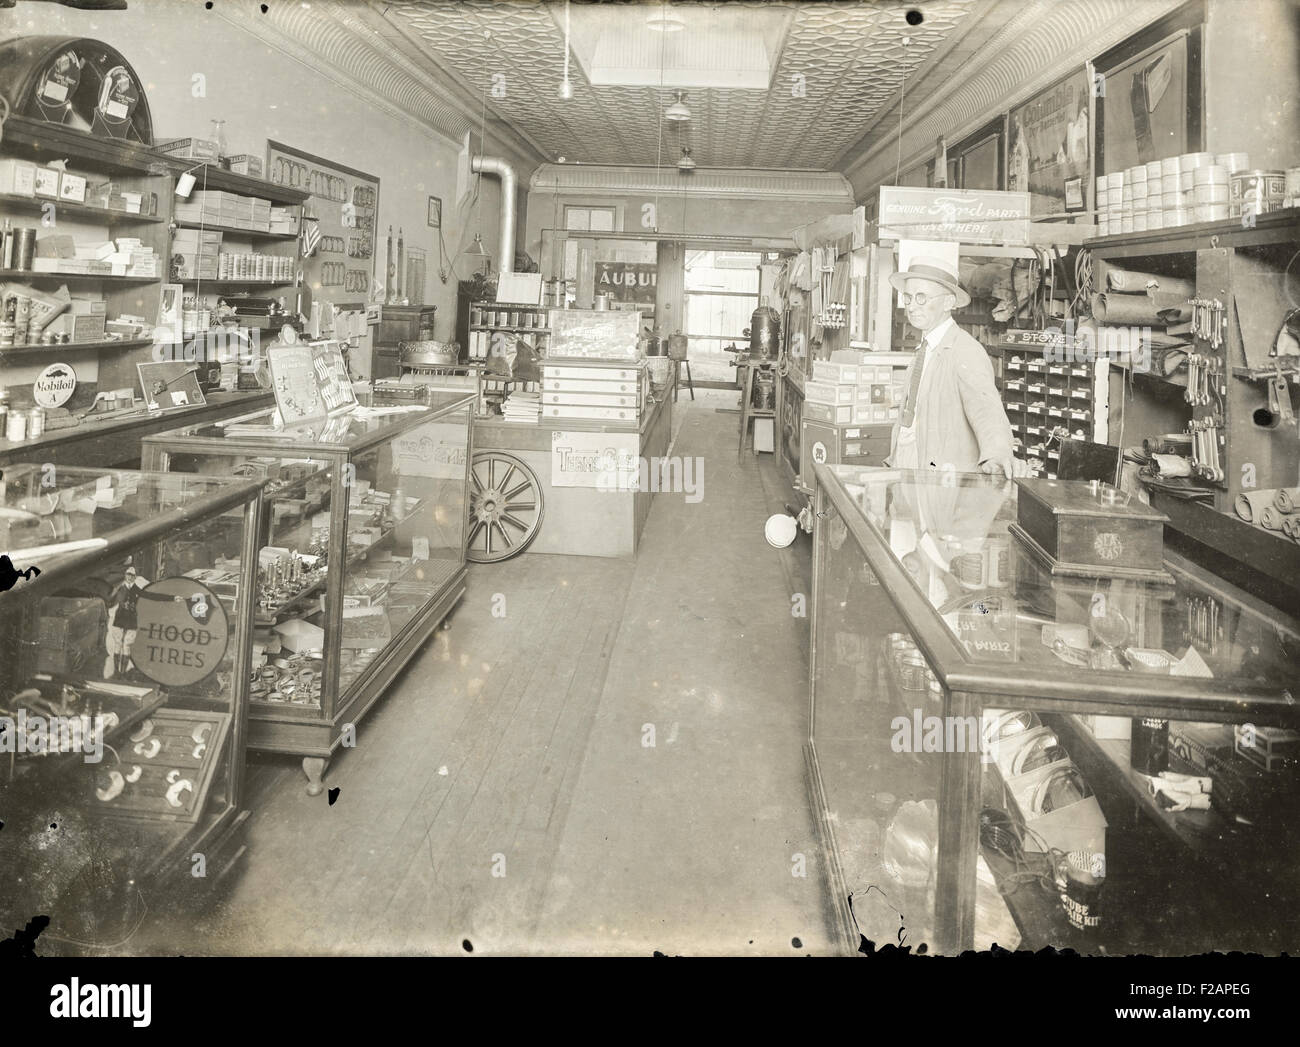 Antique circa 1910 photograph, interior of an auto parts store. Location, USA. Signage and advertising is visible for Genuine Ford Parts, Stone Rim Repair Parts, National Mazda, Columbia Dry Batteries, Hood Tires, Mobiloil A, Schrader Universal Valve Repair Tool, and Eveready Daylo. Stock Photo